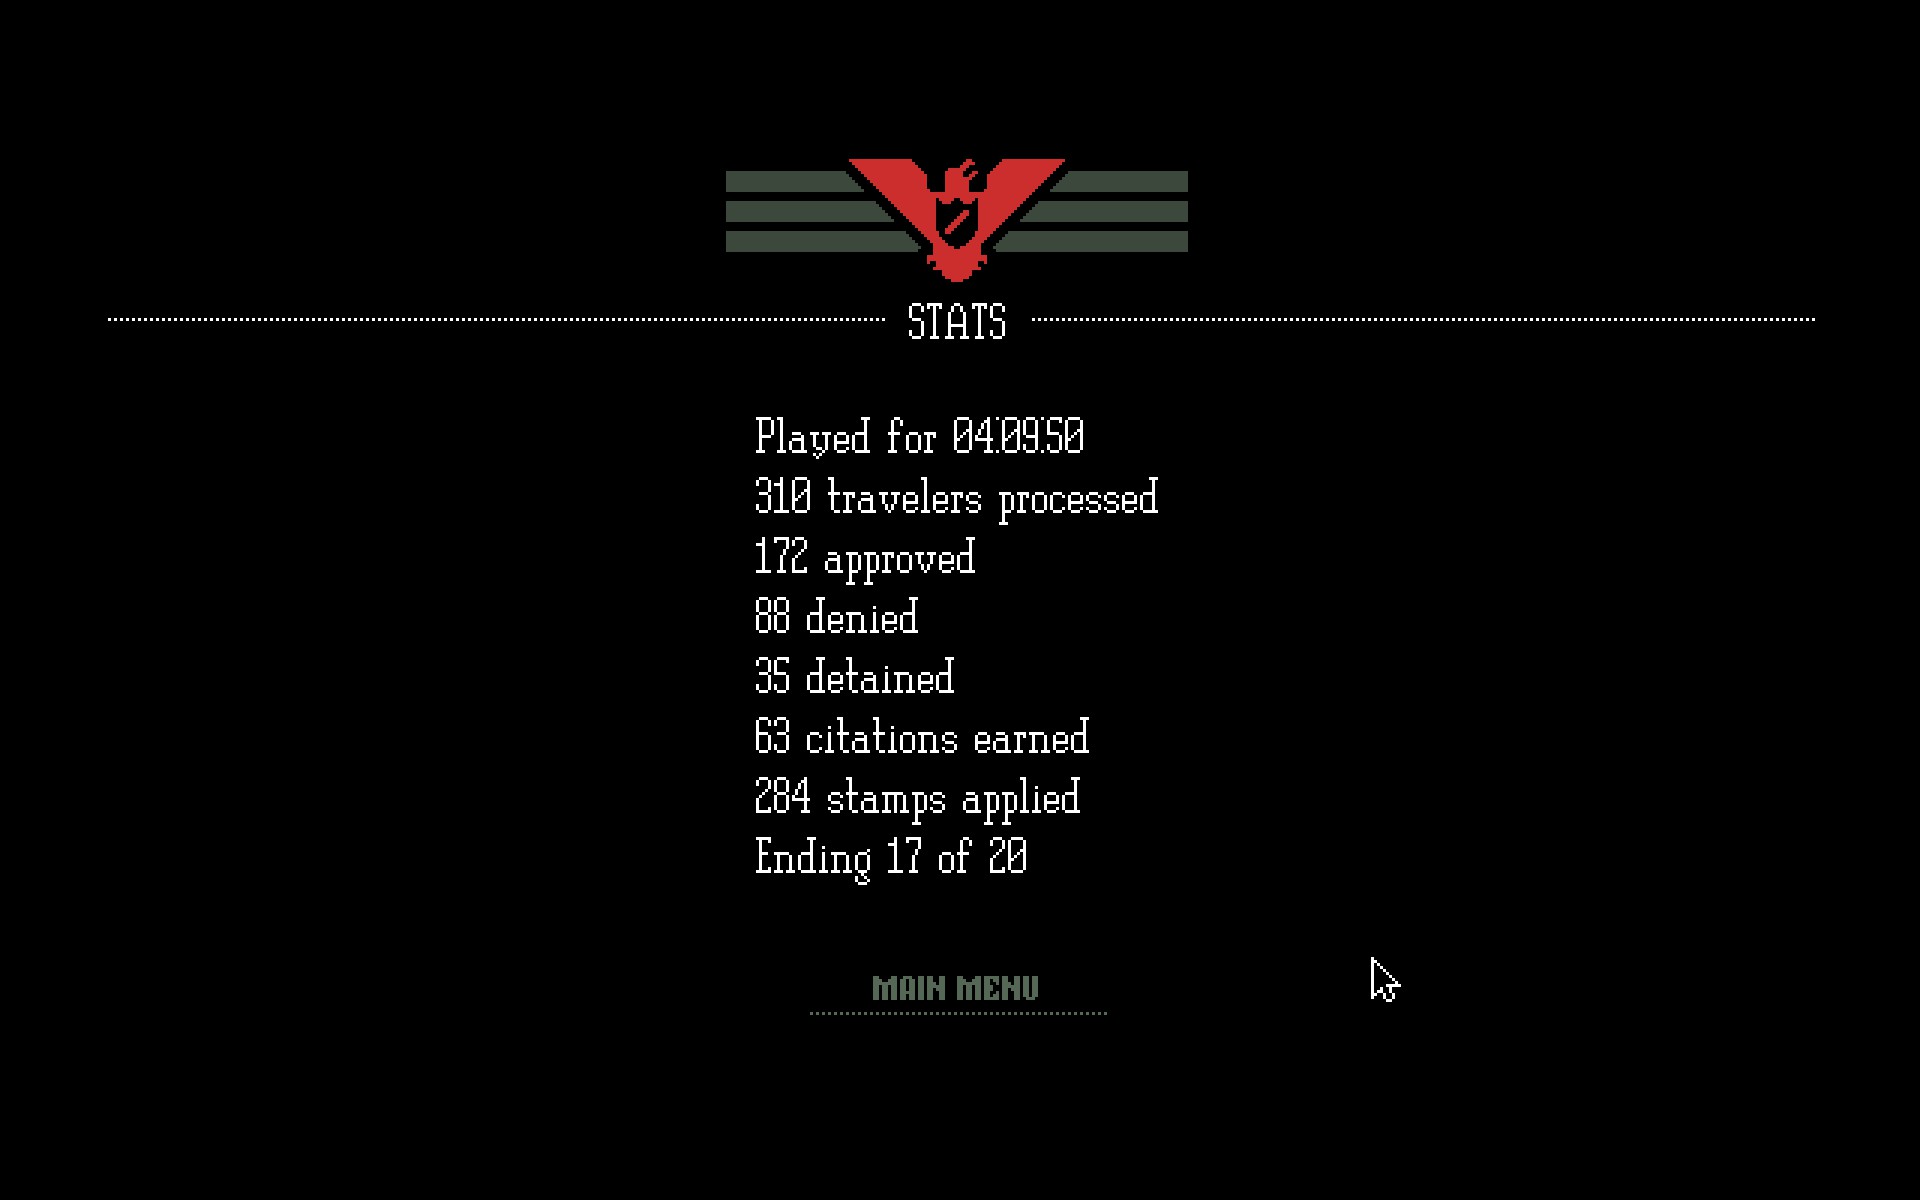 Papers, Please Review (PC)